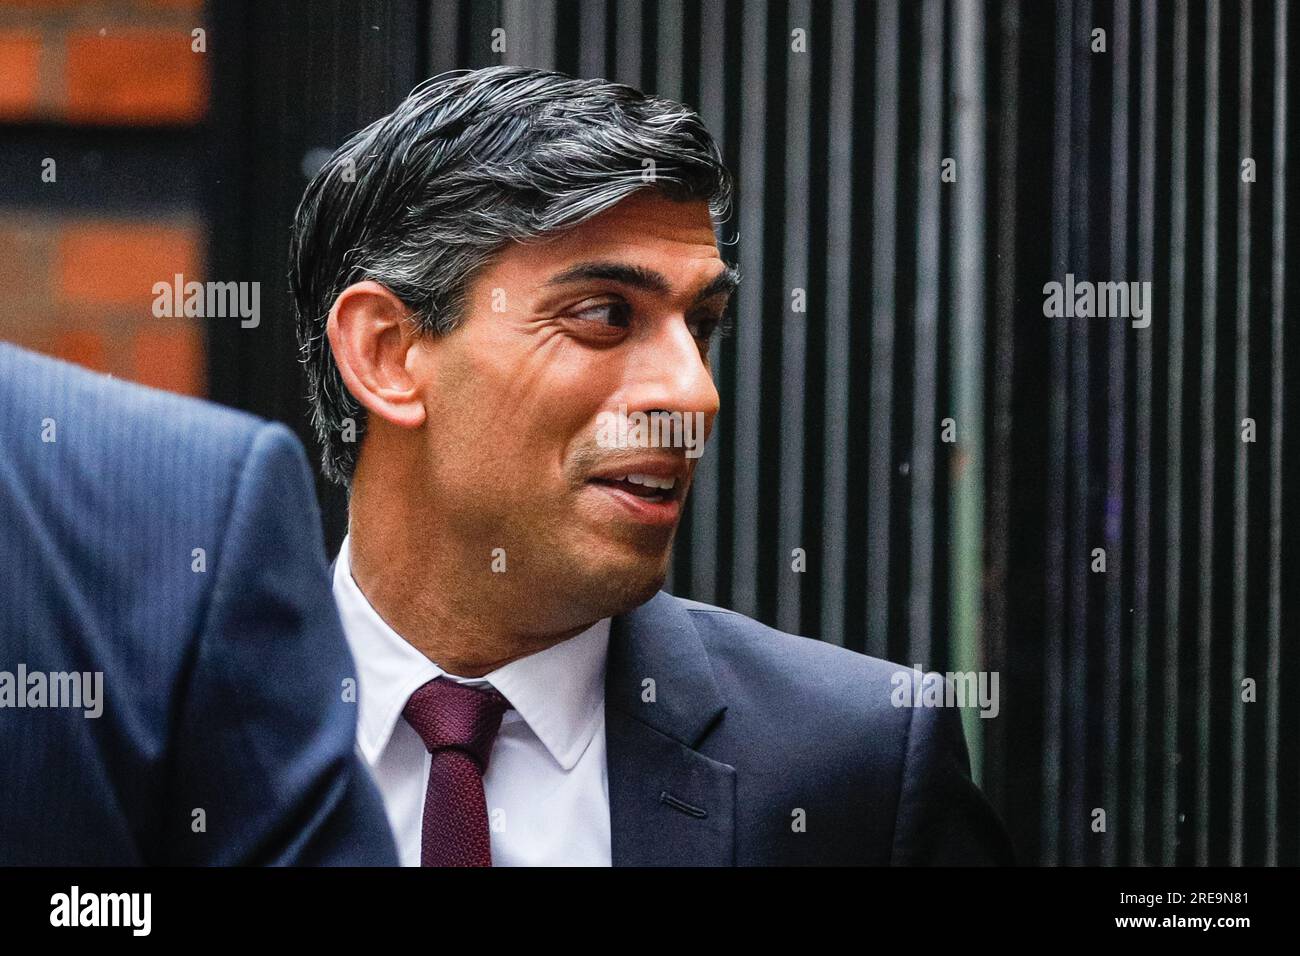 London, UK. 26th July, 2023. Prime Minister Rishi Sunak exits following his appearance at the Infected Blood Inquiry today, held near Aldwych in central London. The inquiry is ongoing.The PM is said to face pressure from bereaved families accept compensation recommendations by the inquiry's chairman, which were made three months ago. Sunak arrived and left via the Civil Service Club, connected to the back of the building and venue, rather than the front entrance where he would have faced the press, as well as bereaved families and protesters. Credit: Imageplotter/Alamy Live News Stock Photo